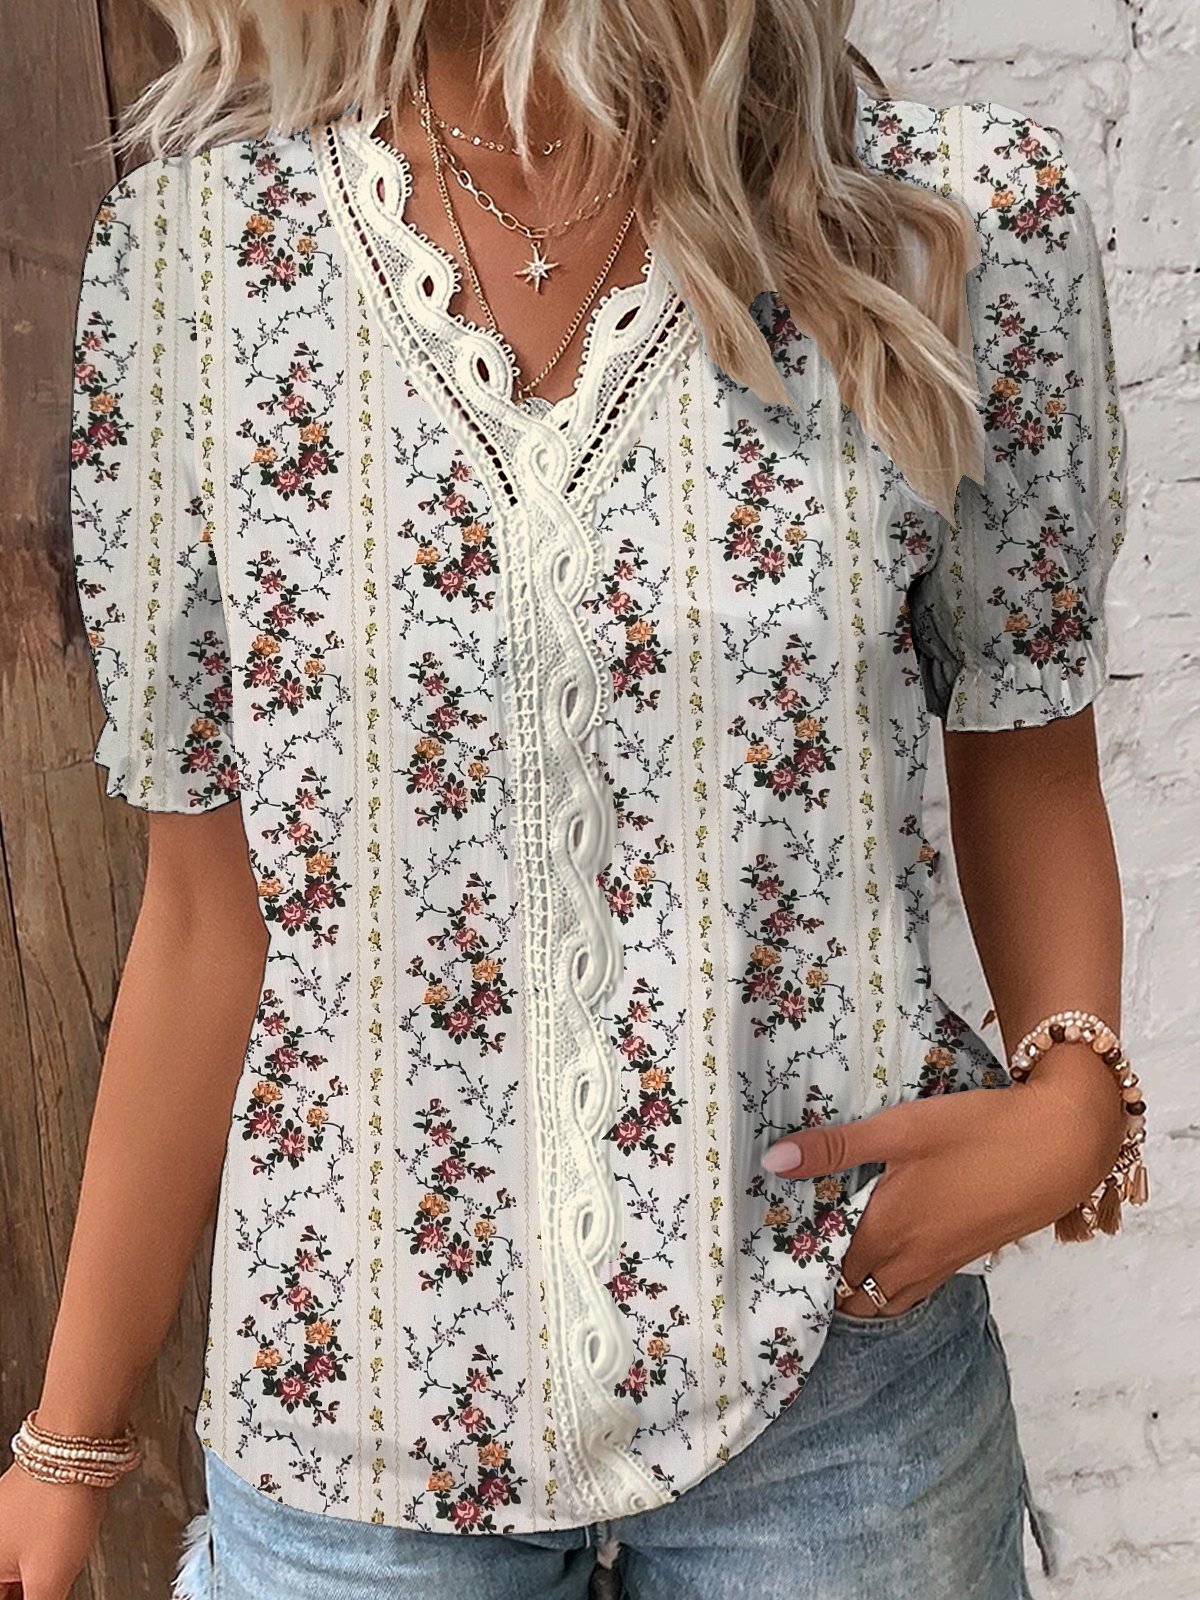 Lace Loose Casual Floral Blouse | justfashionnow